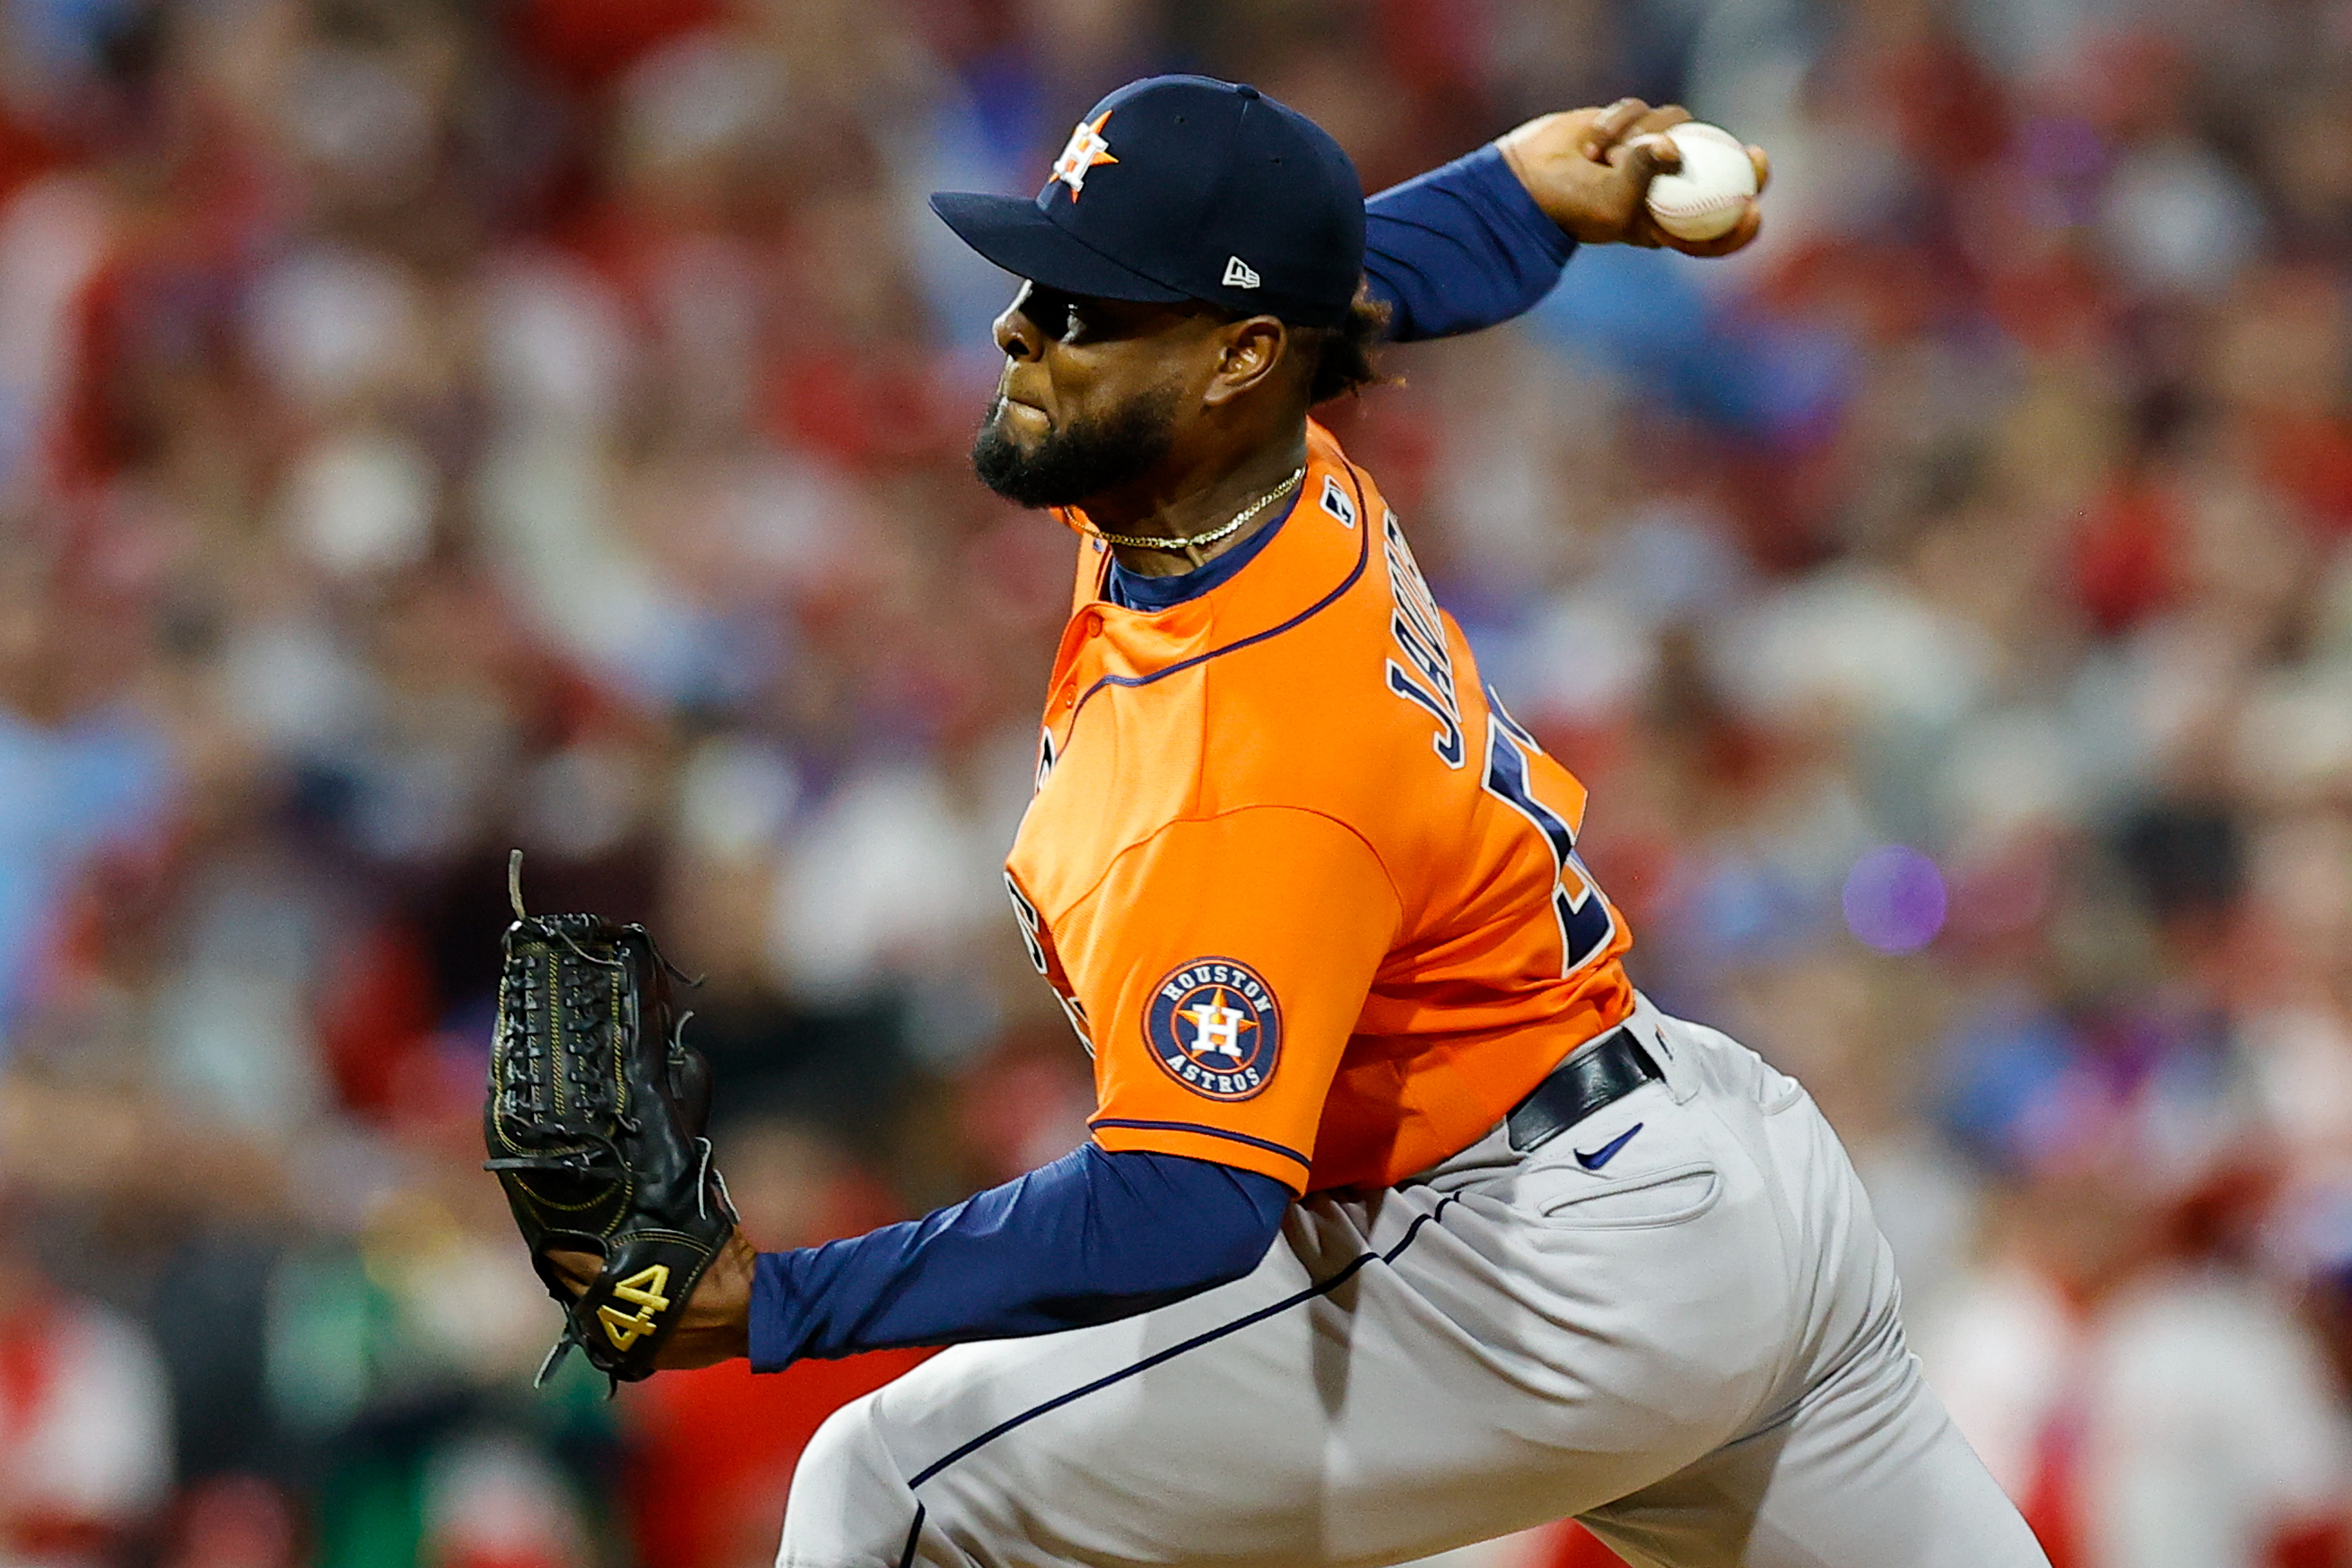 Cristian Javier is prime example of Astros' staying power